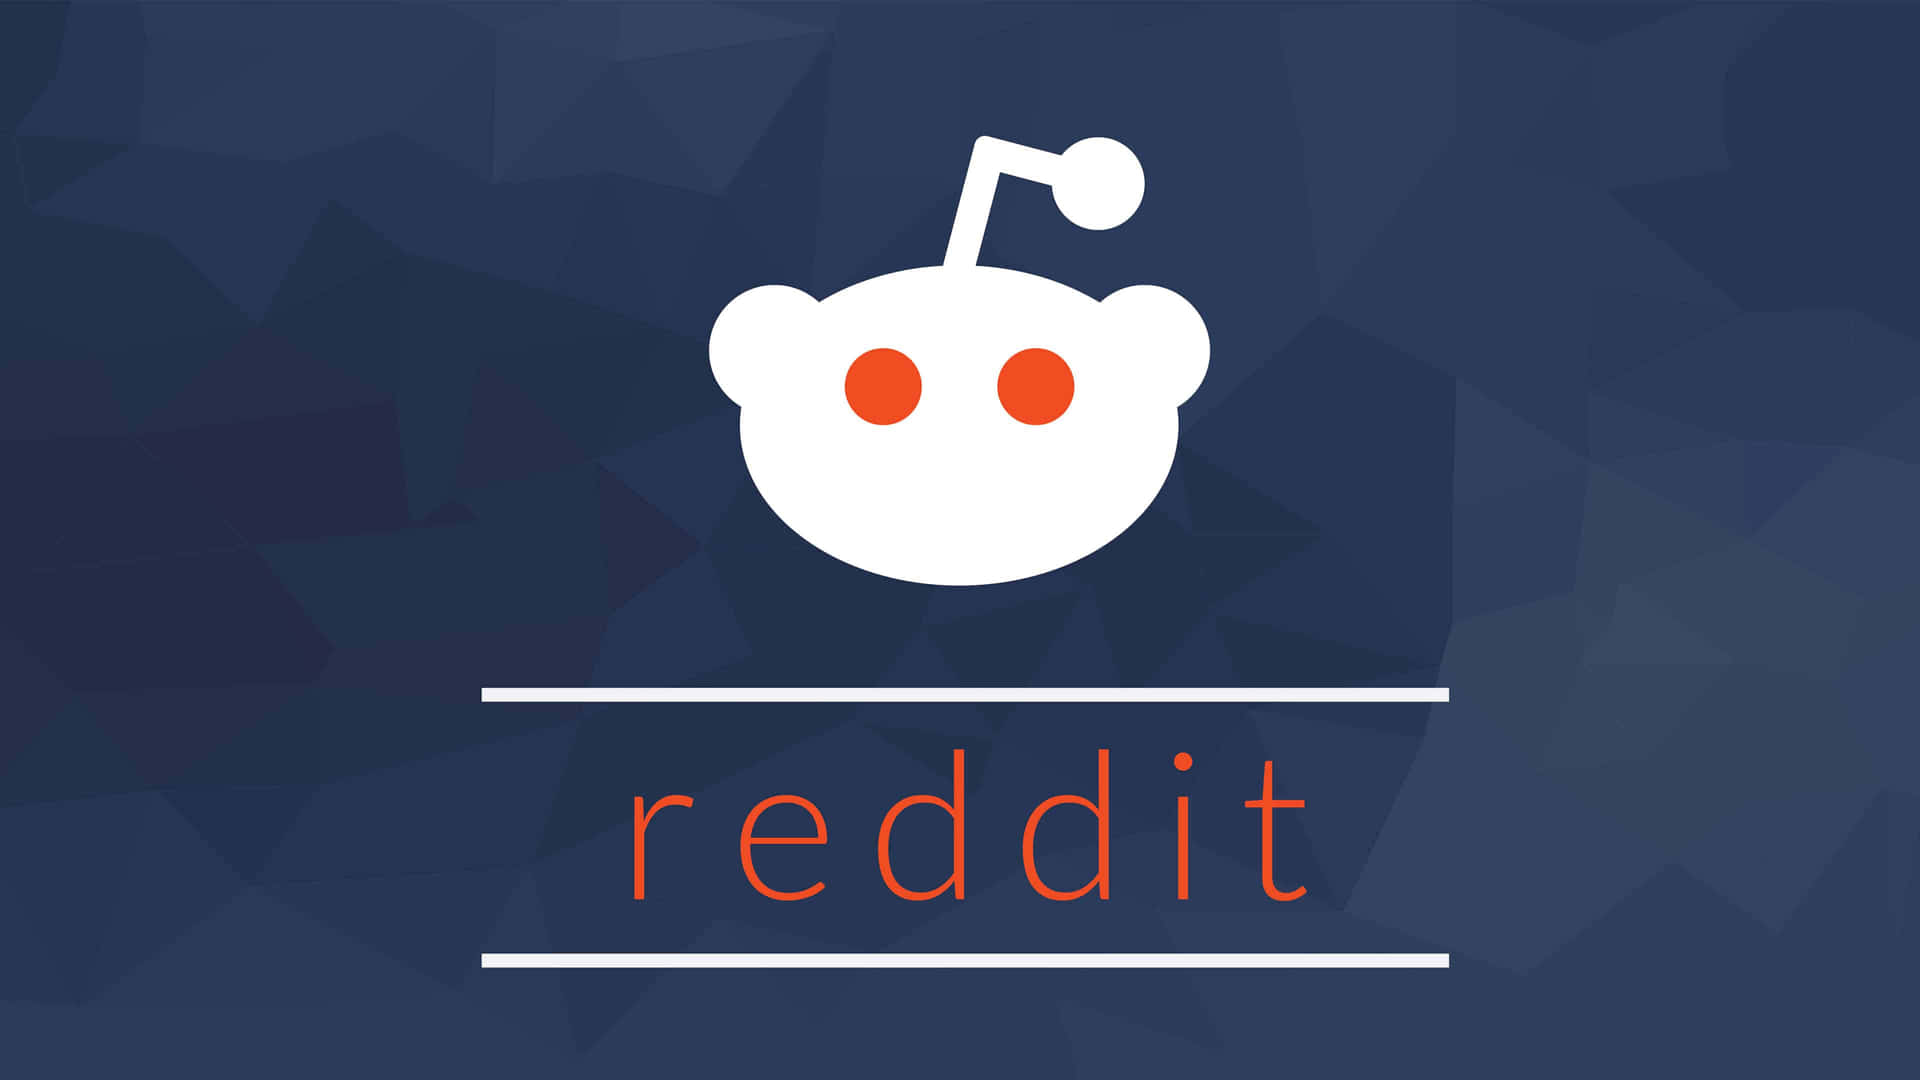 Get Connected with the Online Reddit Community